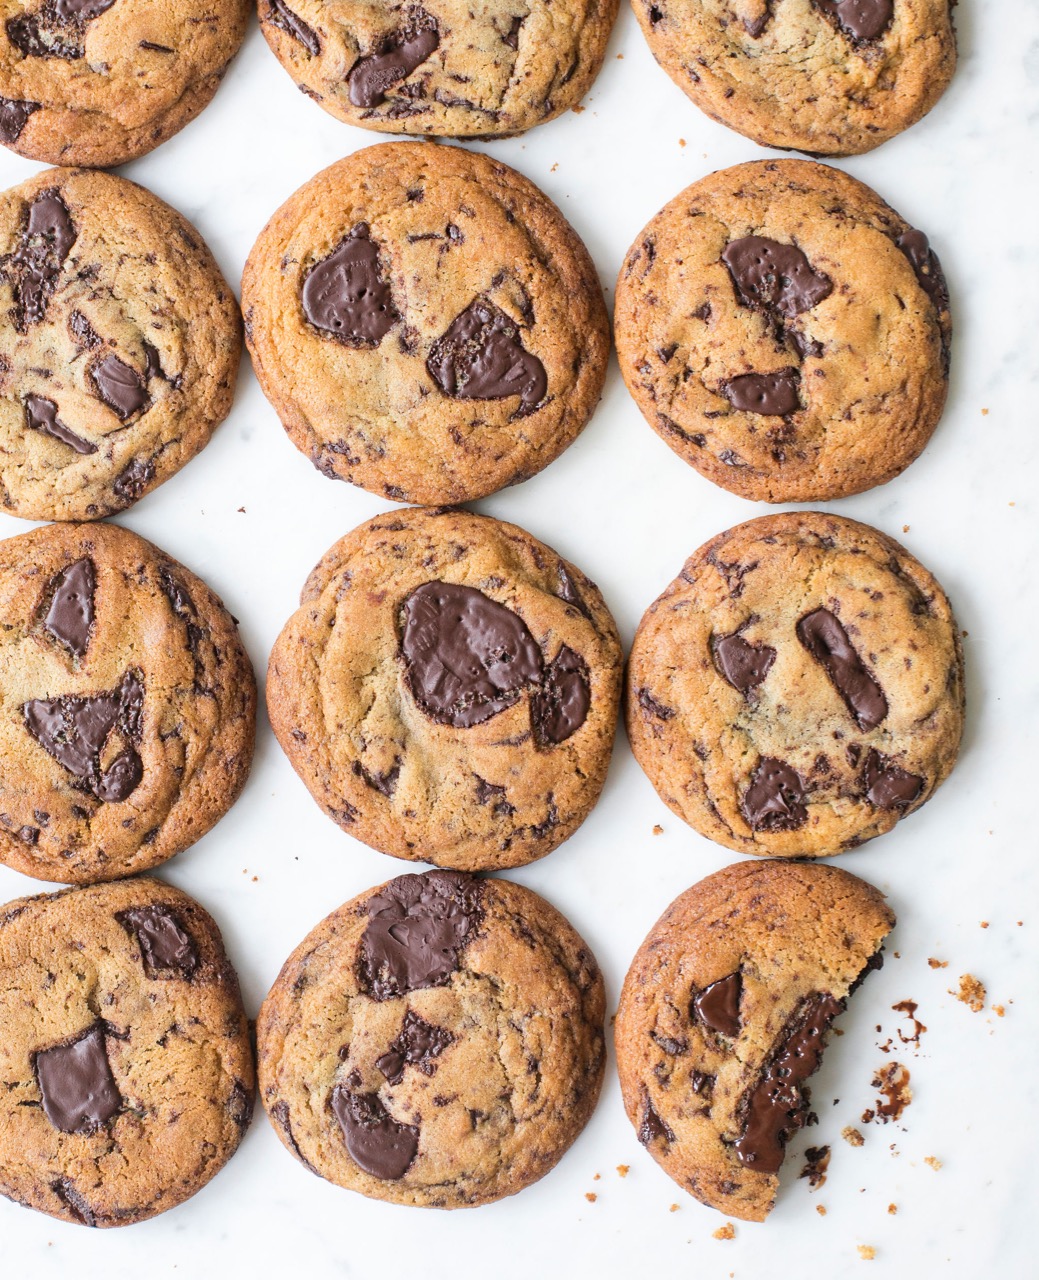 Gemma's 5 Star Chocolate Chip Cookies from the Bigger Bolder Baking Cookbook